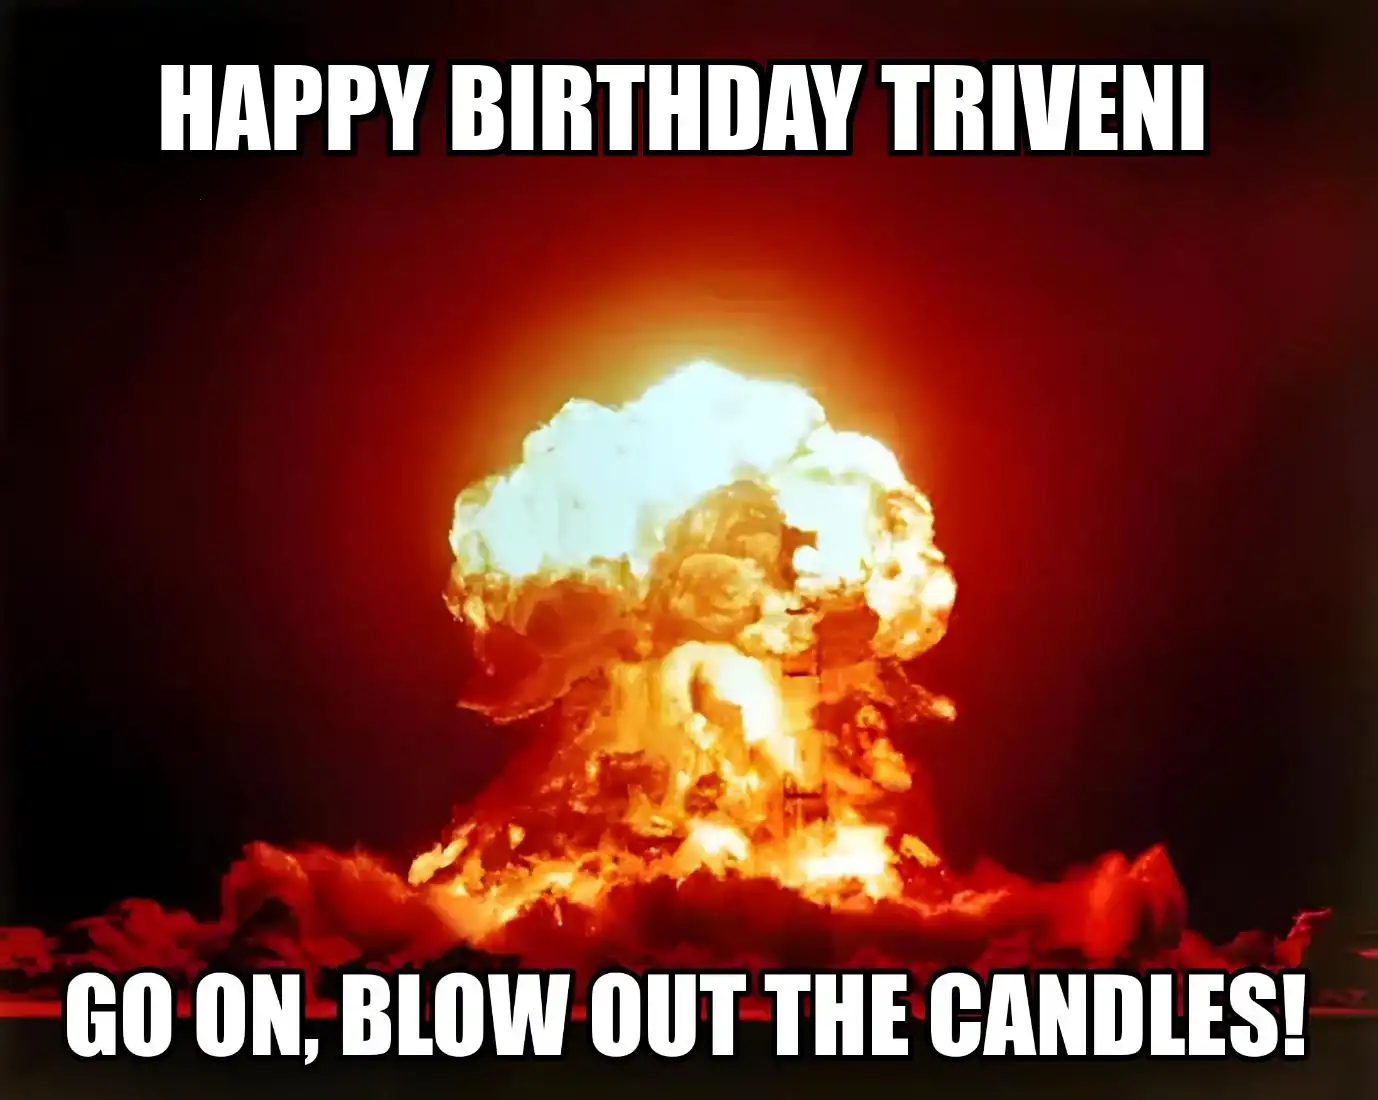 Happy Birthday Triveni Go On Blow Out The Candles Meme